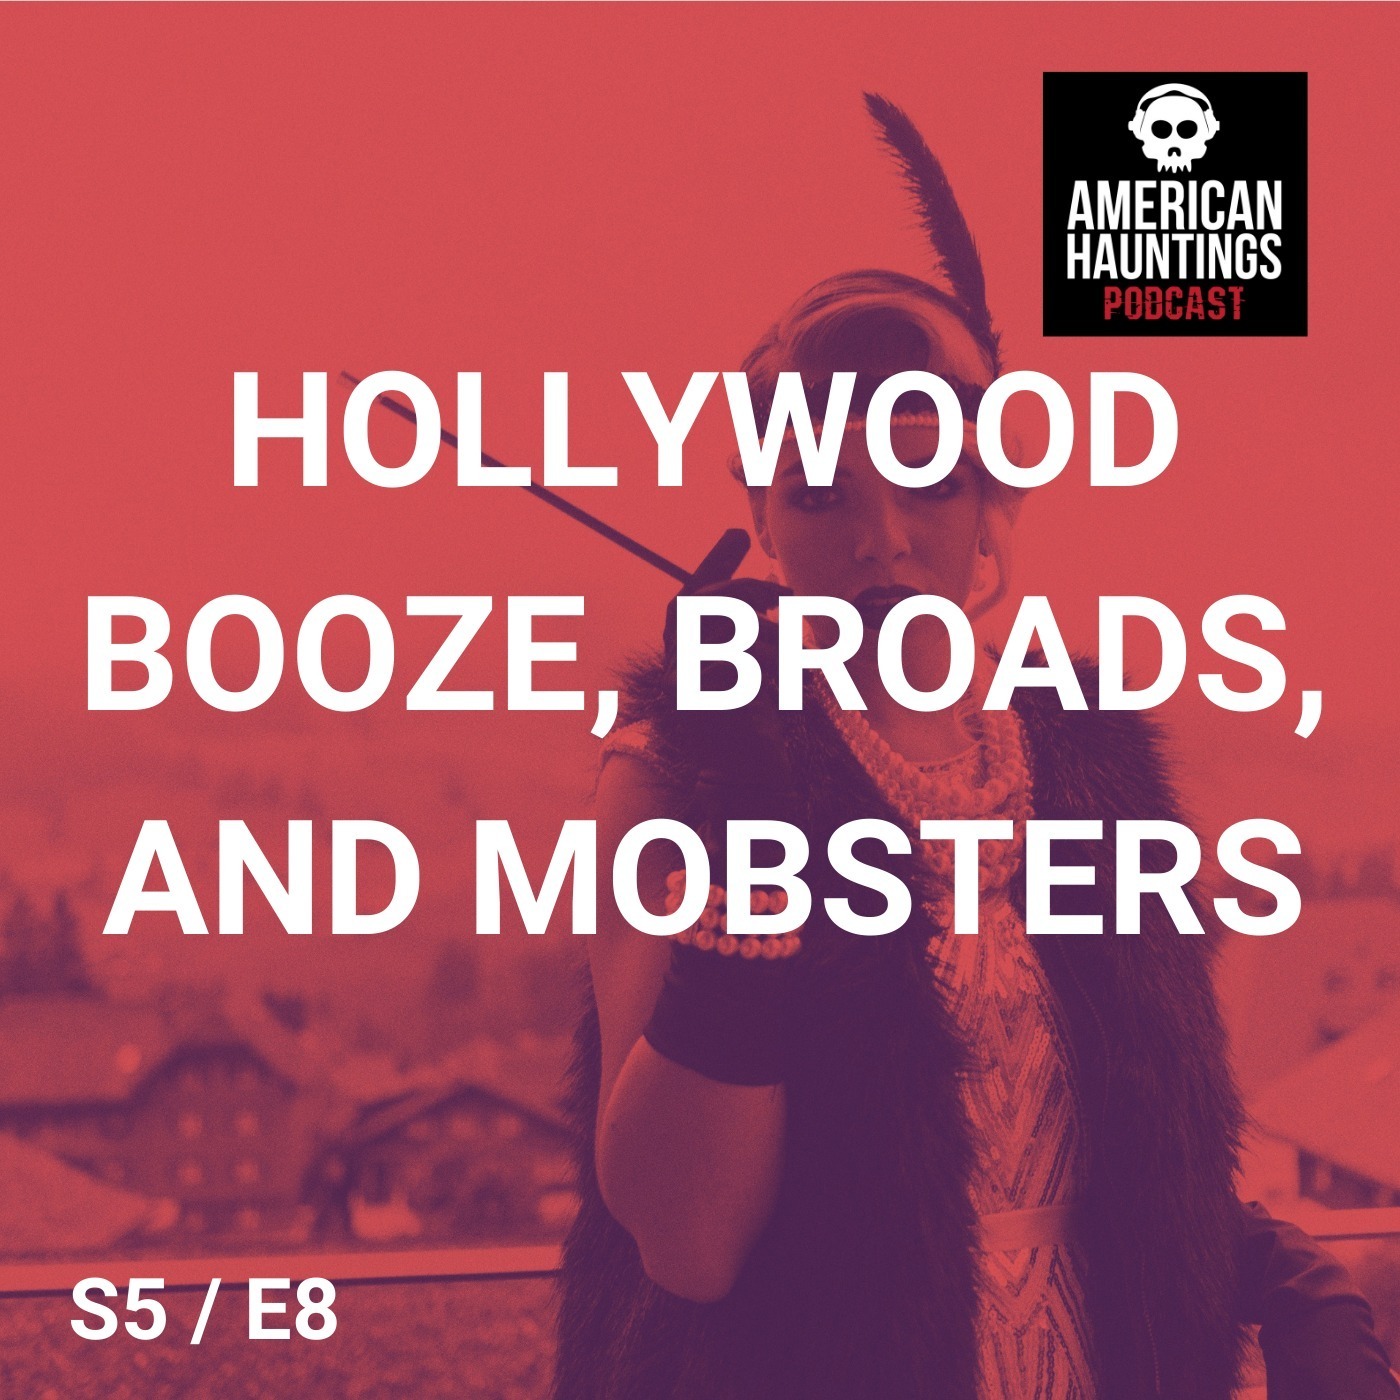 Hollywood Booze, Broads, And Mobsters